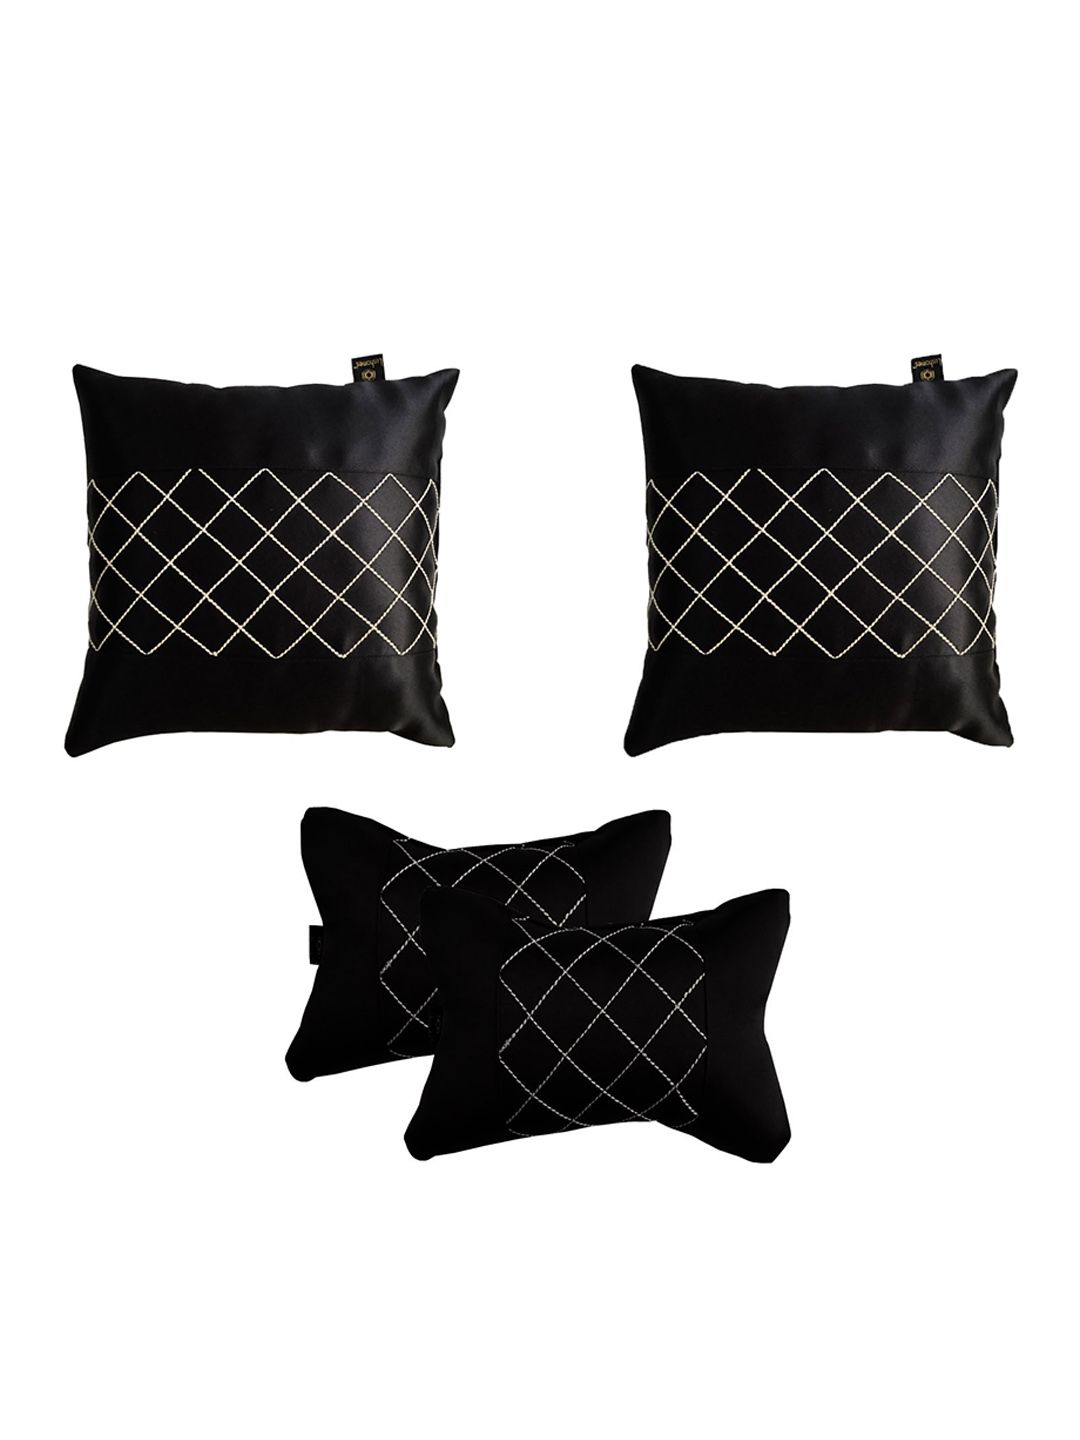 Lushomes Set of 4 Black Embroidered Car Neck Rest Pillow & Cushion Set Price in India